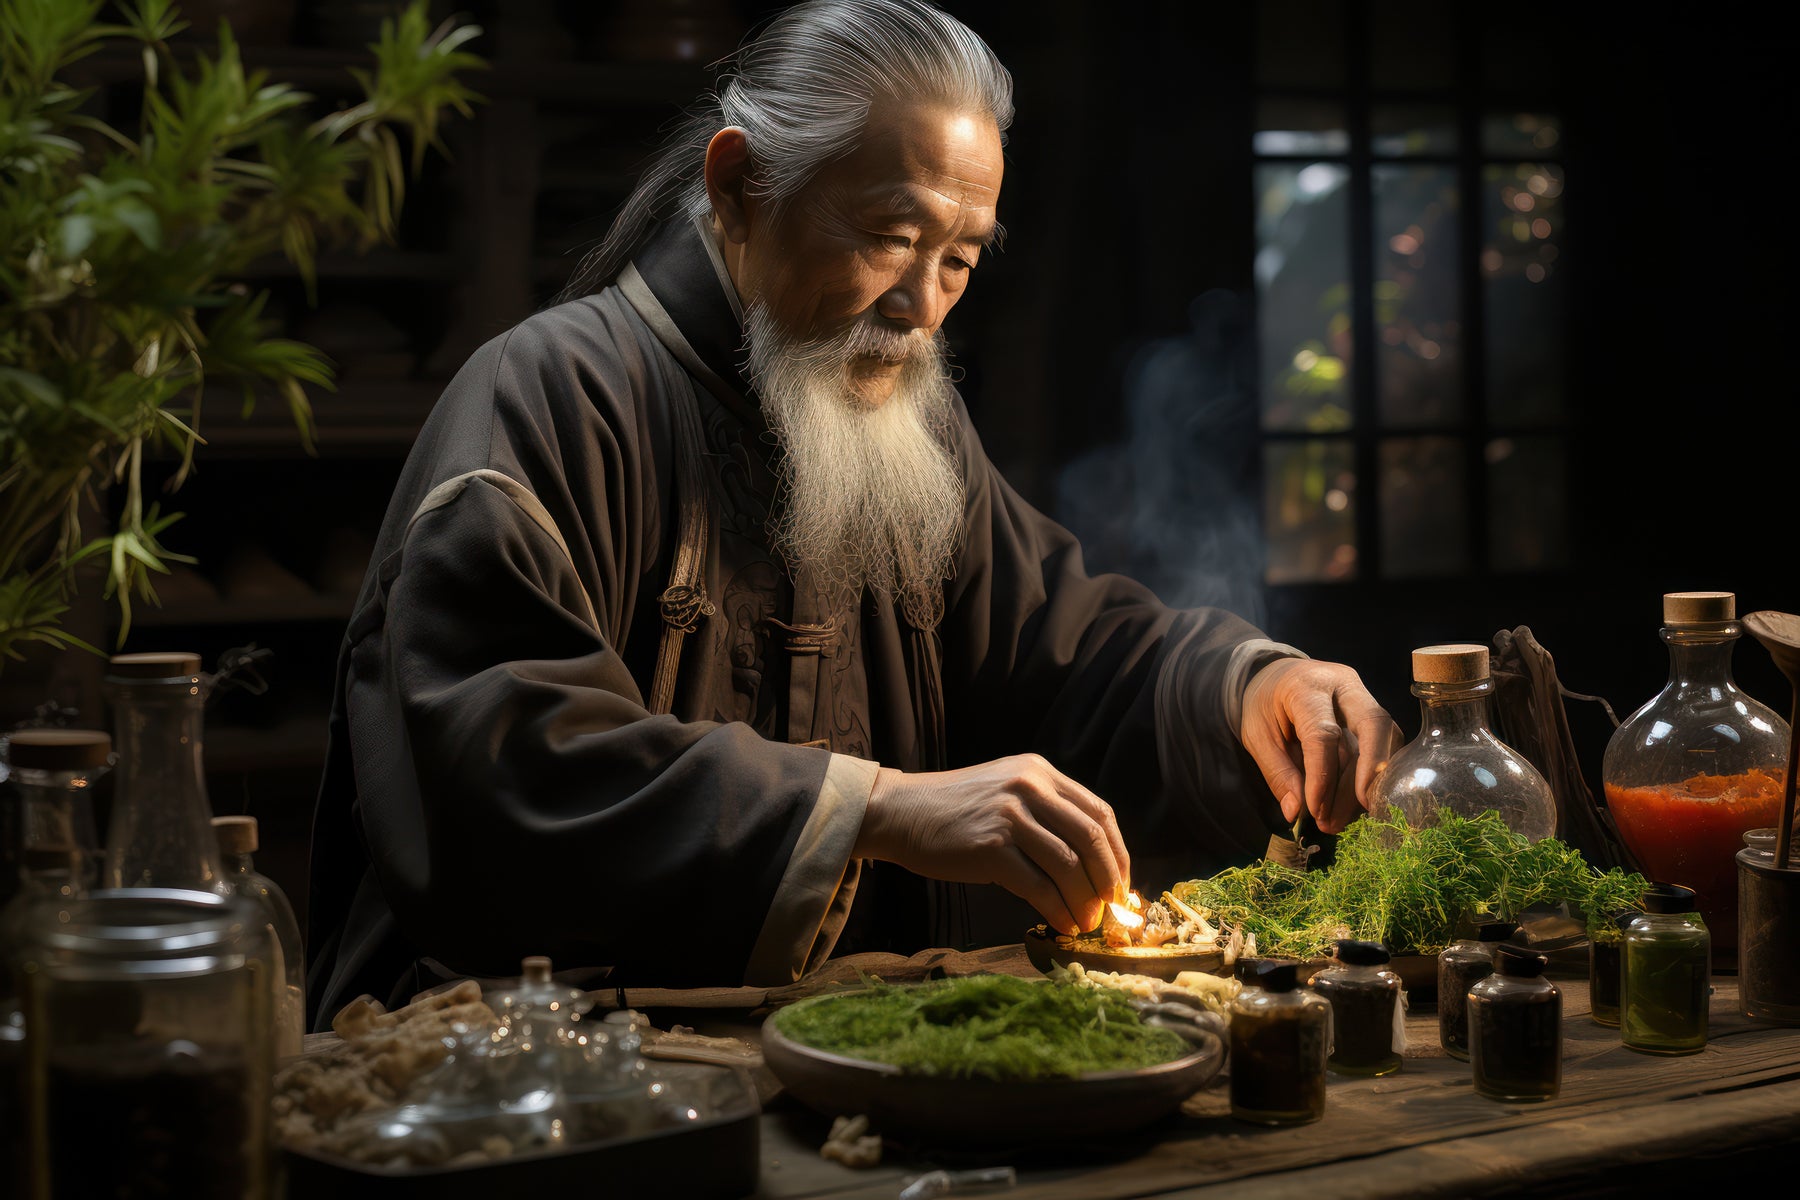 Elixir of Life: The Natural Secret Behind Asia's Age-Old Longevity